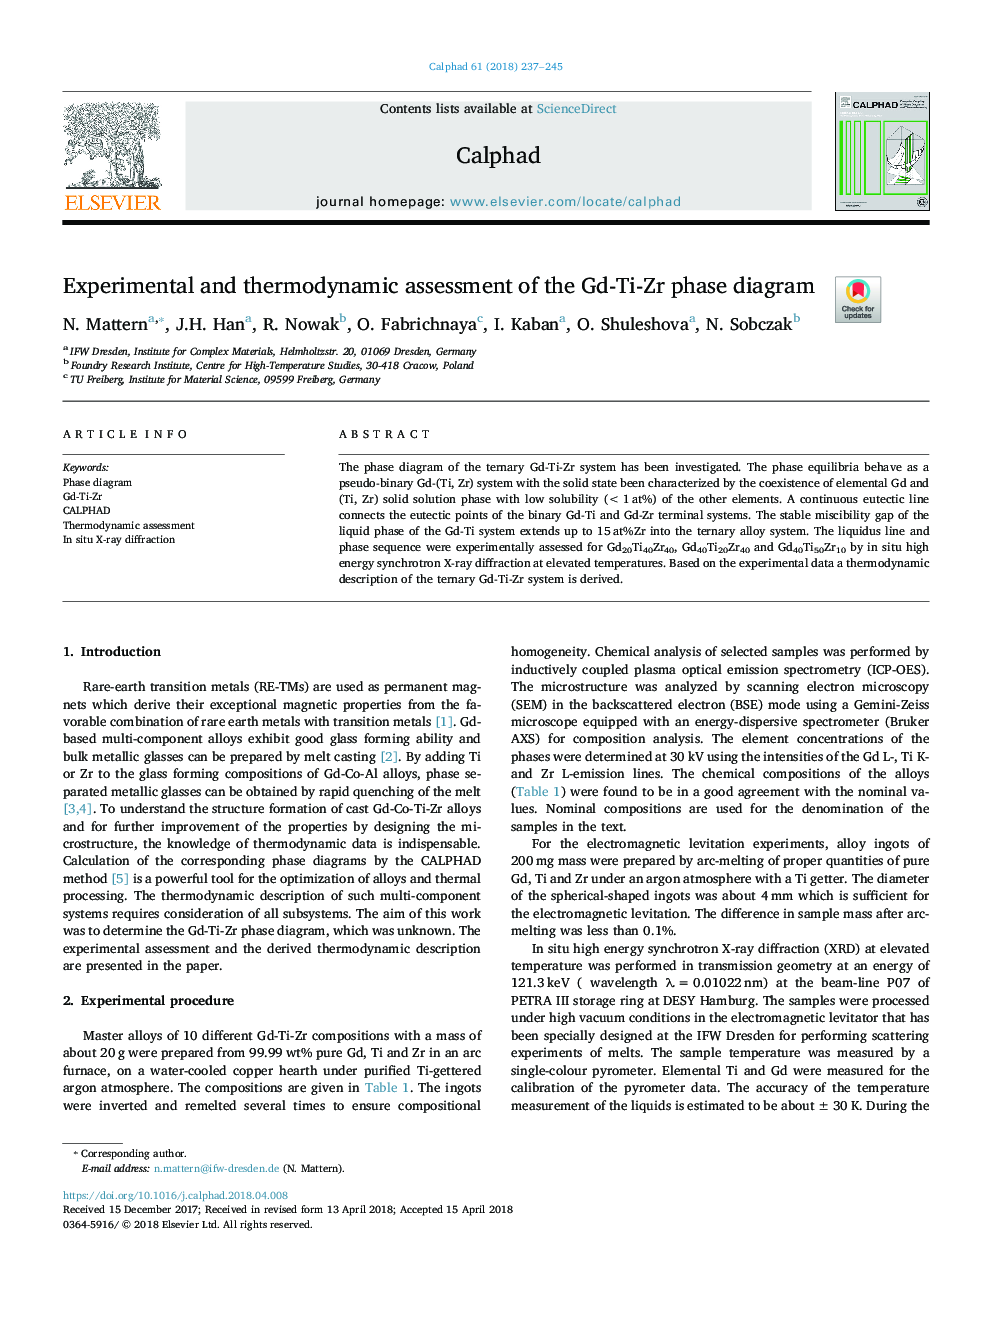 Experimental and thermodynamic assessment of the Gd-Ti-Zr phase diagram